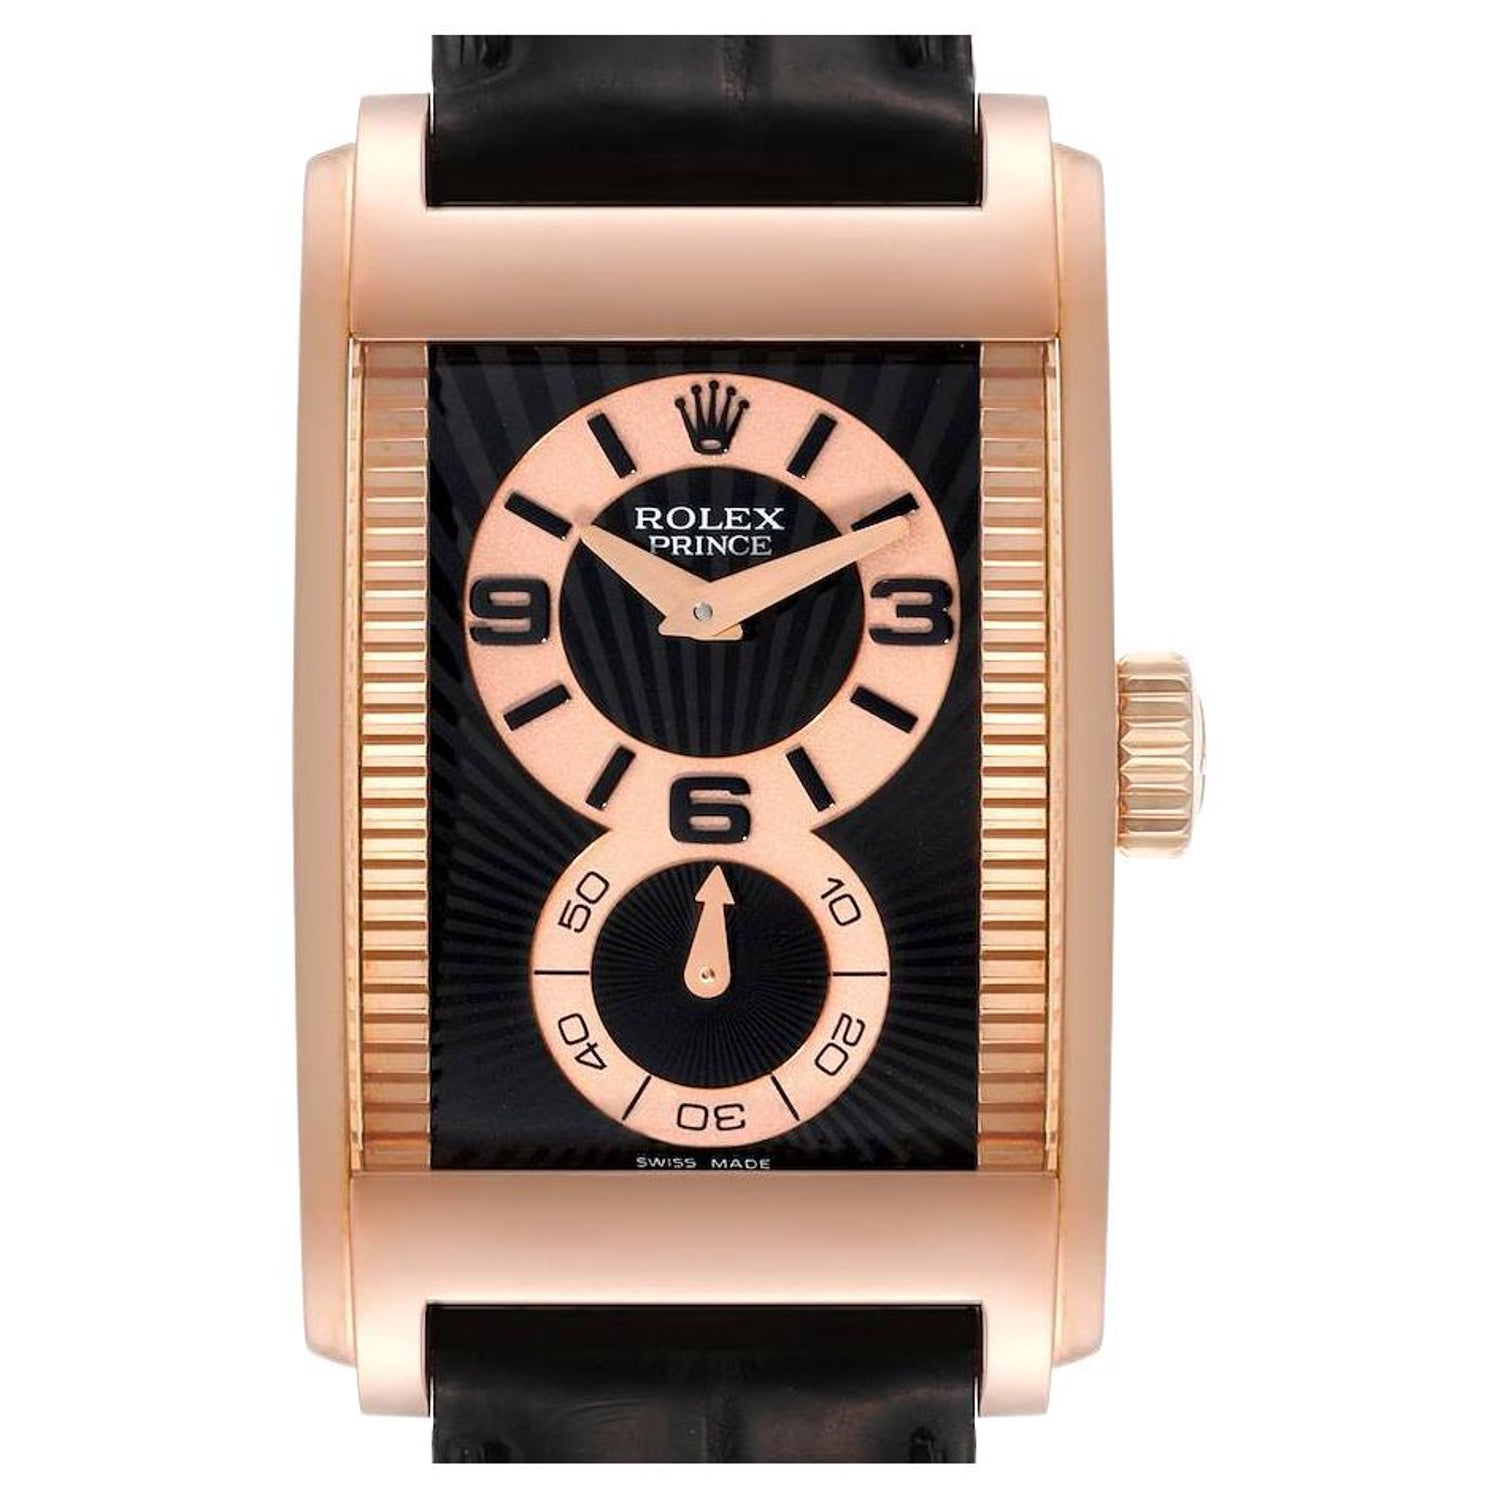 Rolex Cellini Prince 18K Rose Gold Black Dial Mens Watch 5442 at 1stDibs